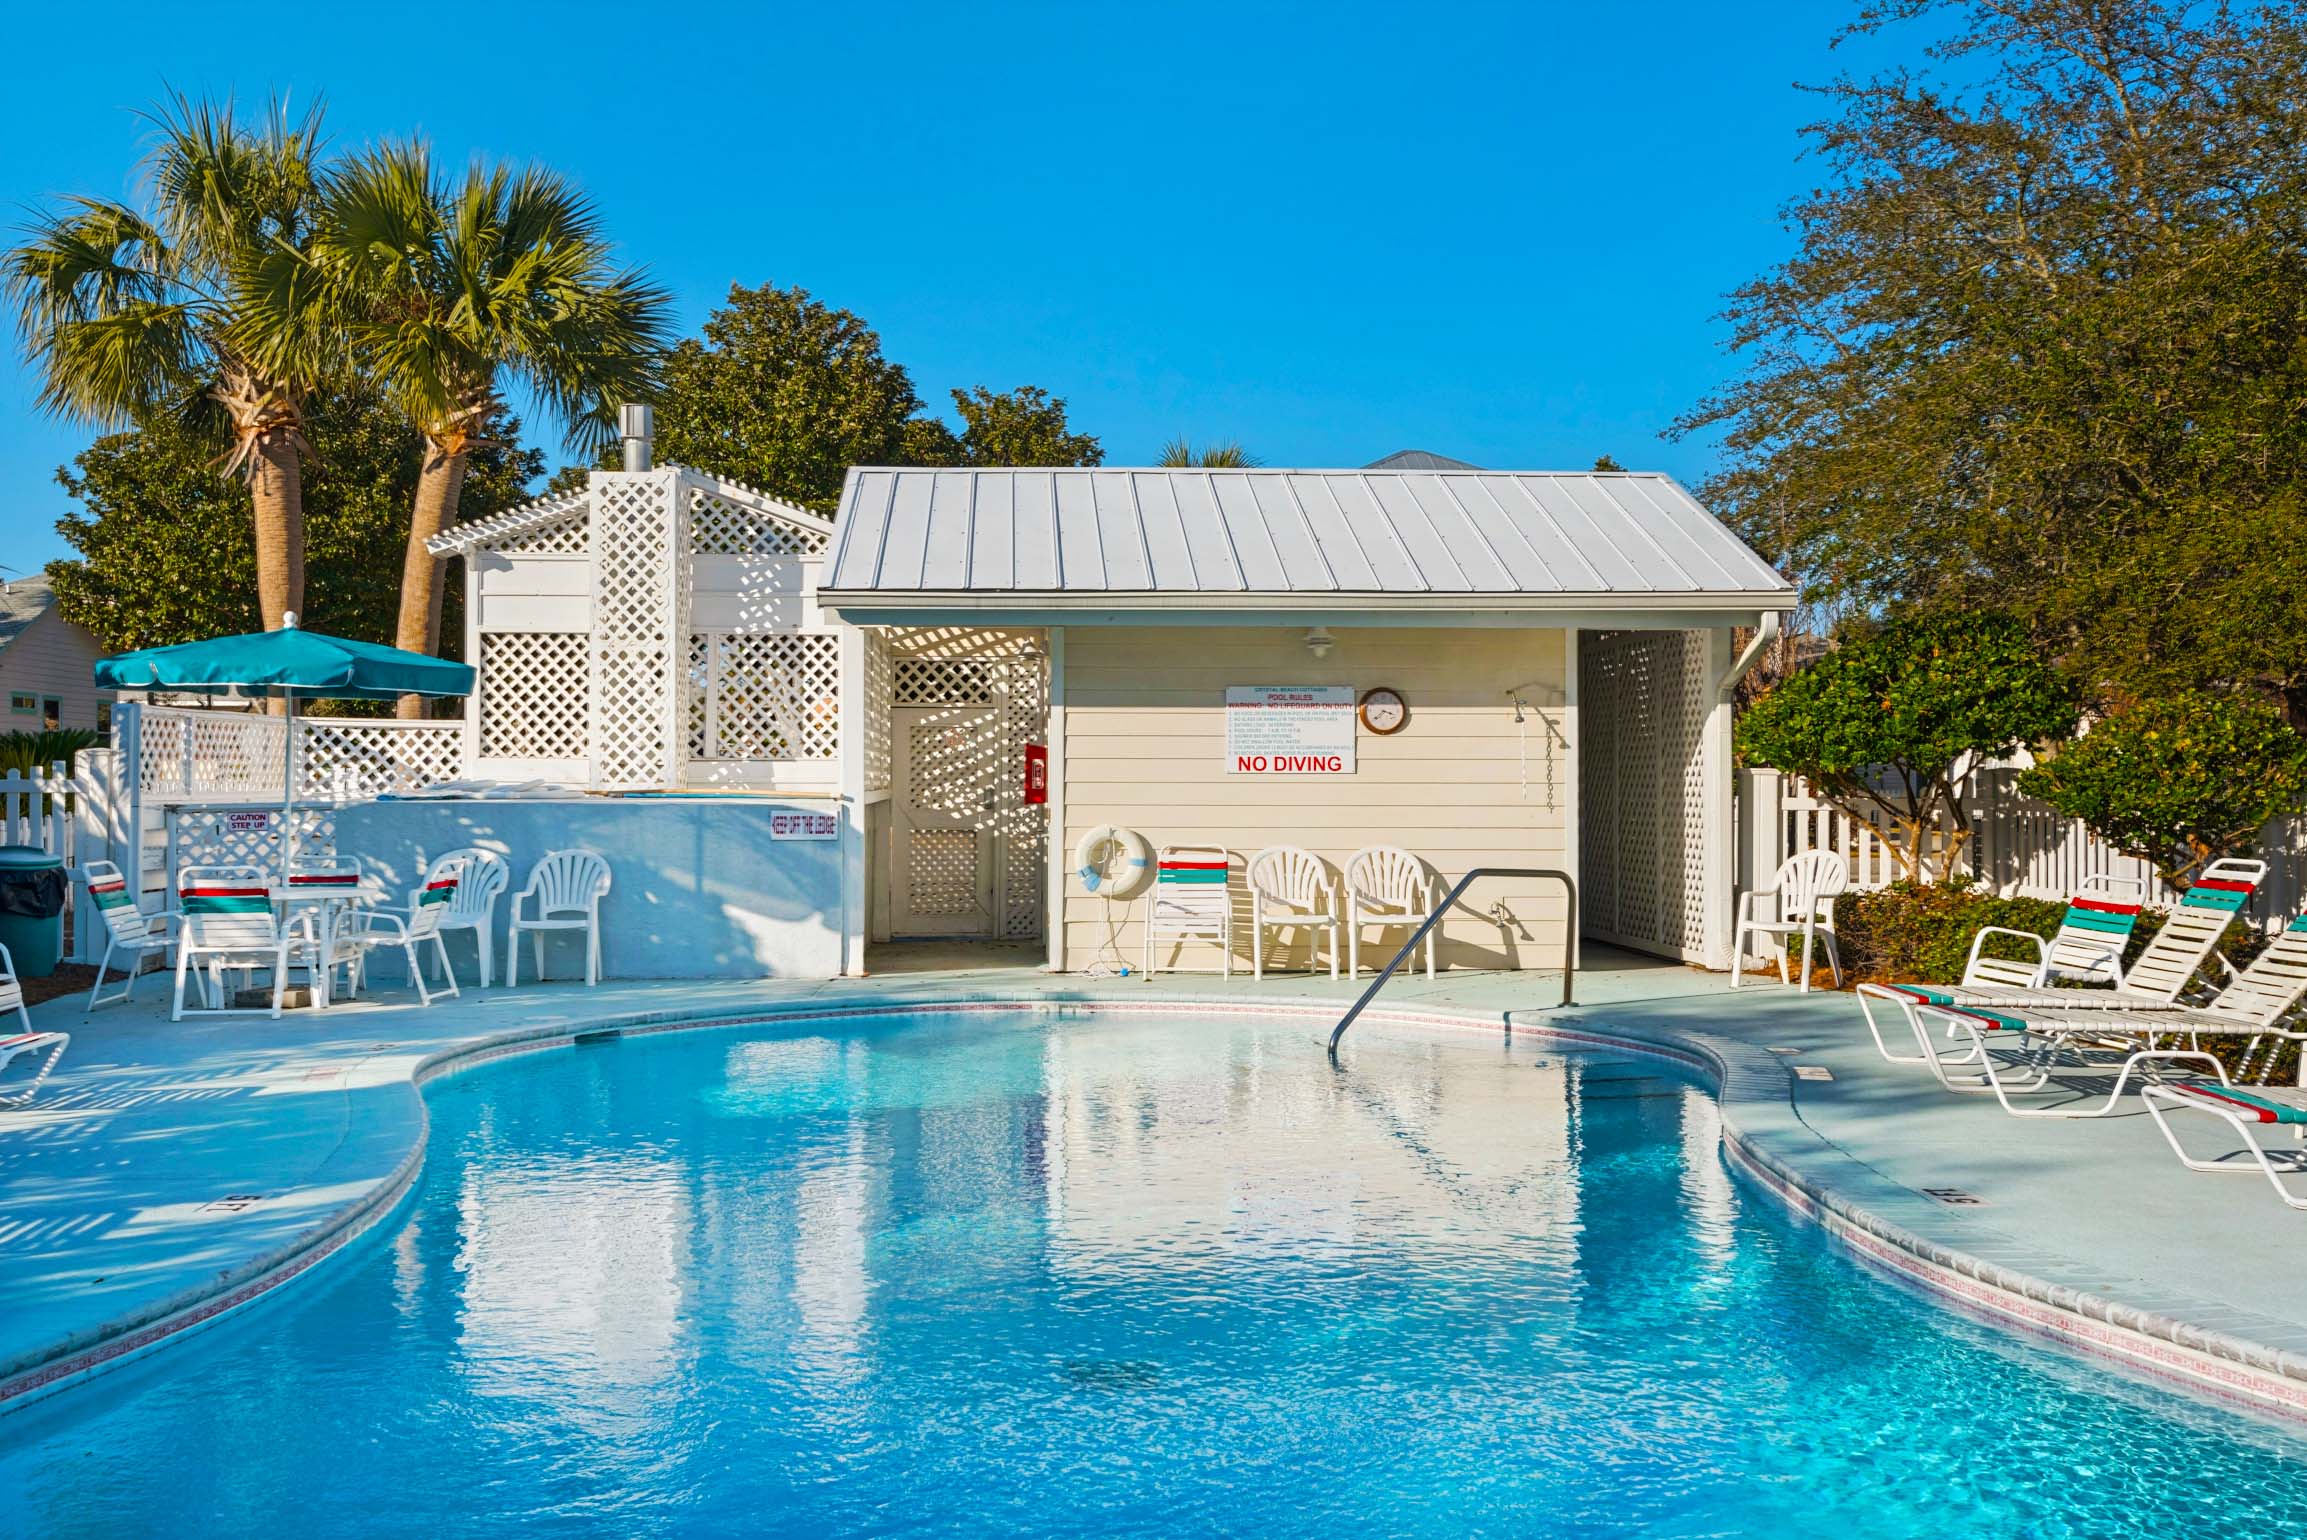 Crystal Beach Cottages pool